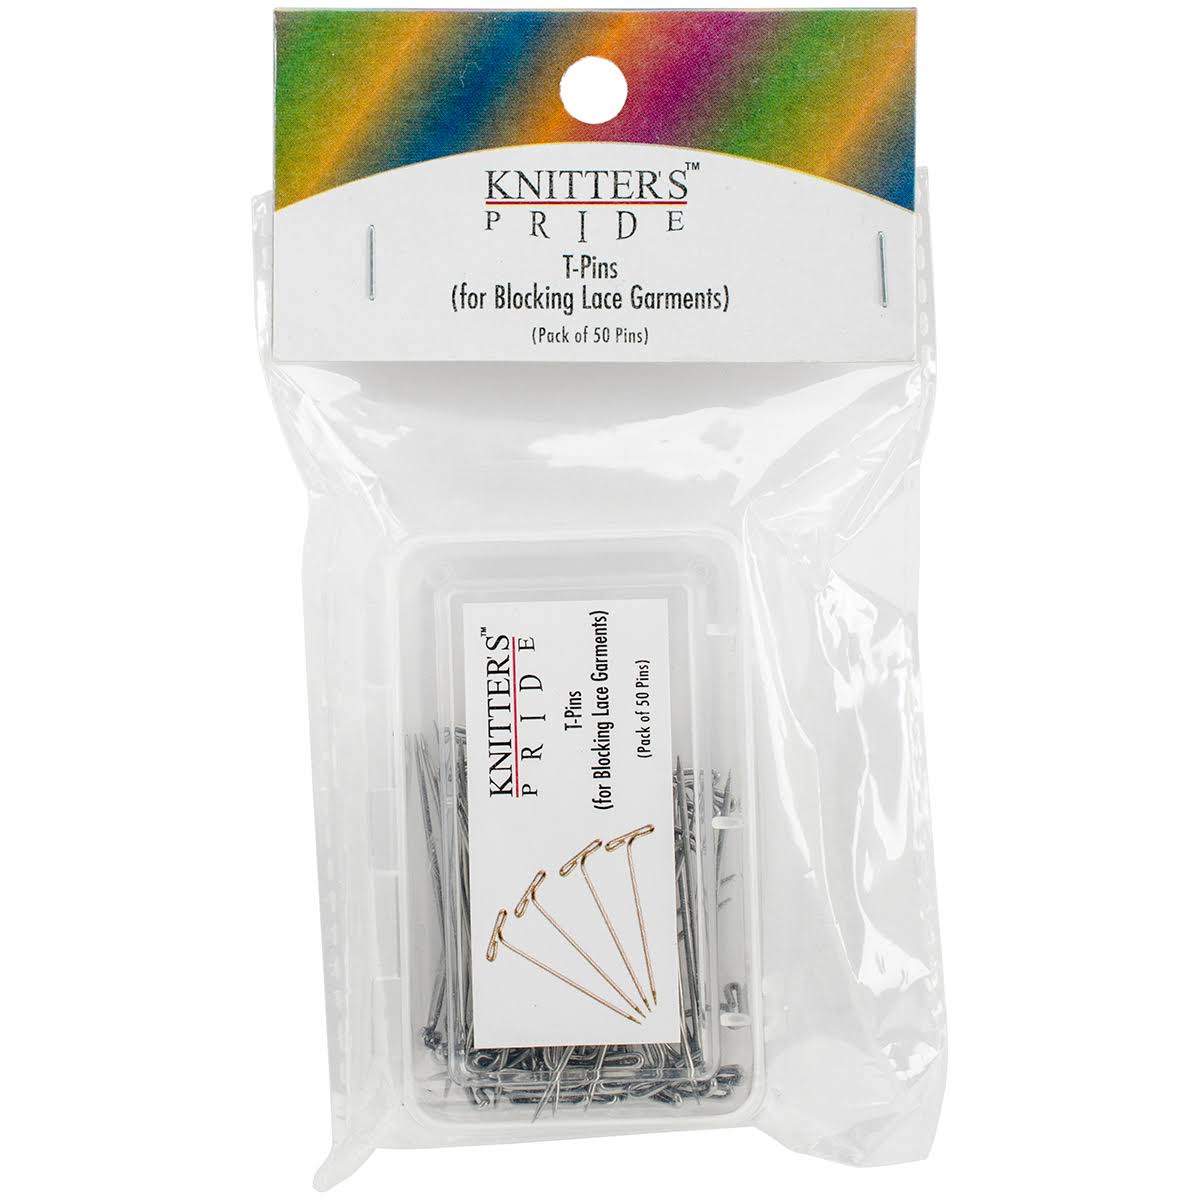 Knitter's Pride T-Pins - Stainless Steel